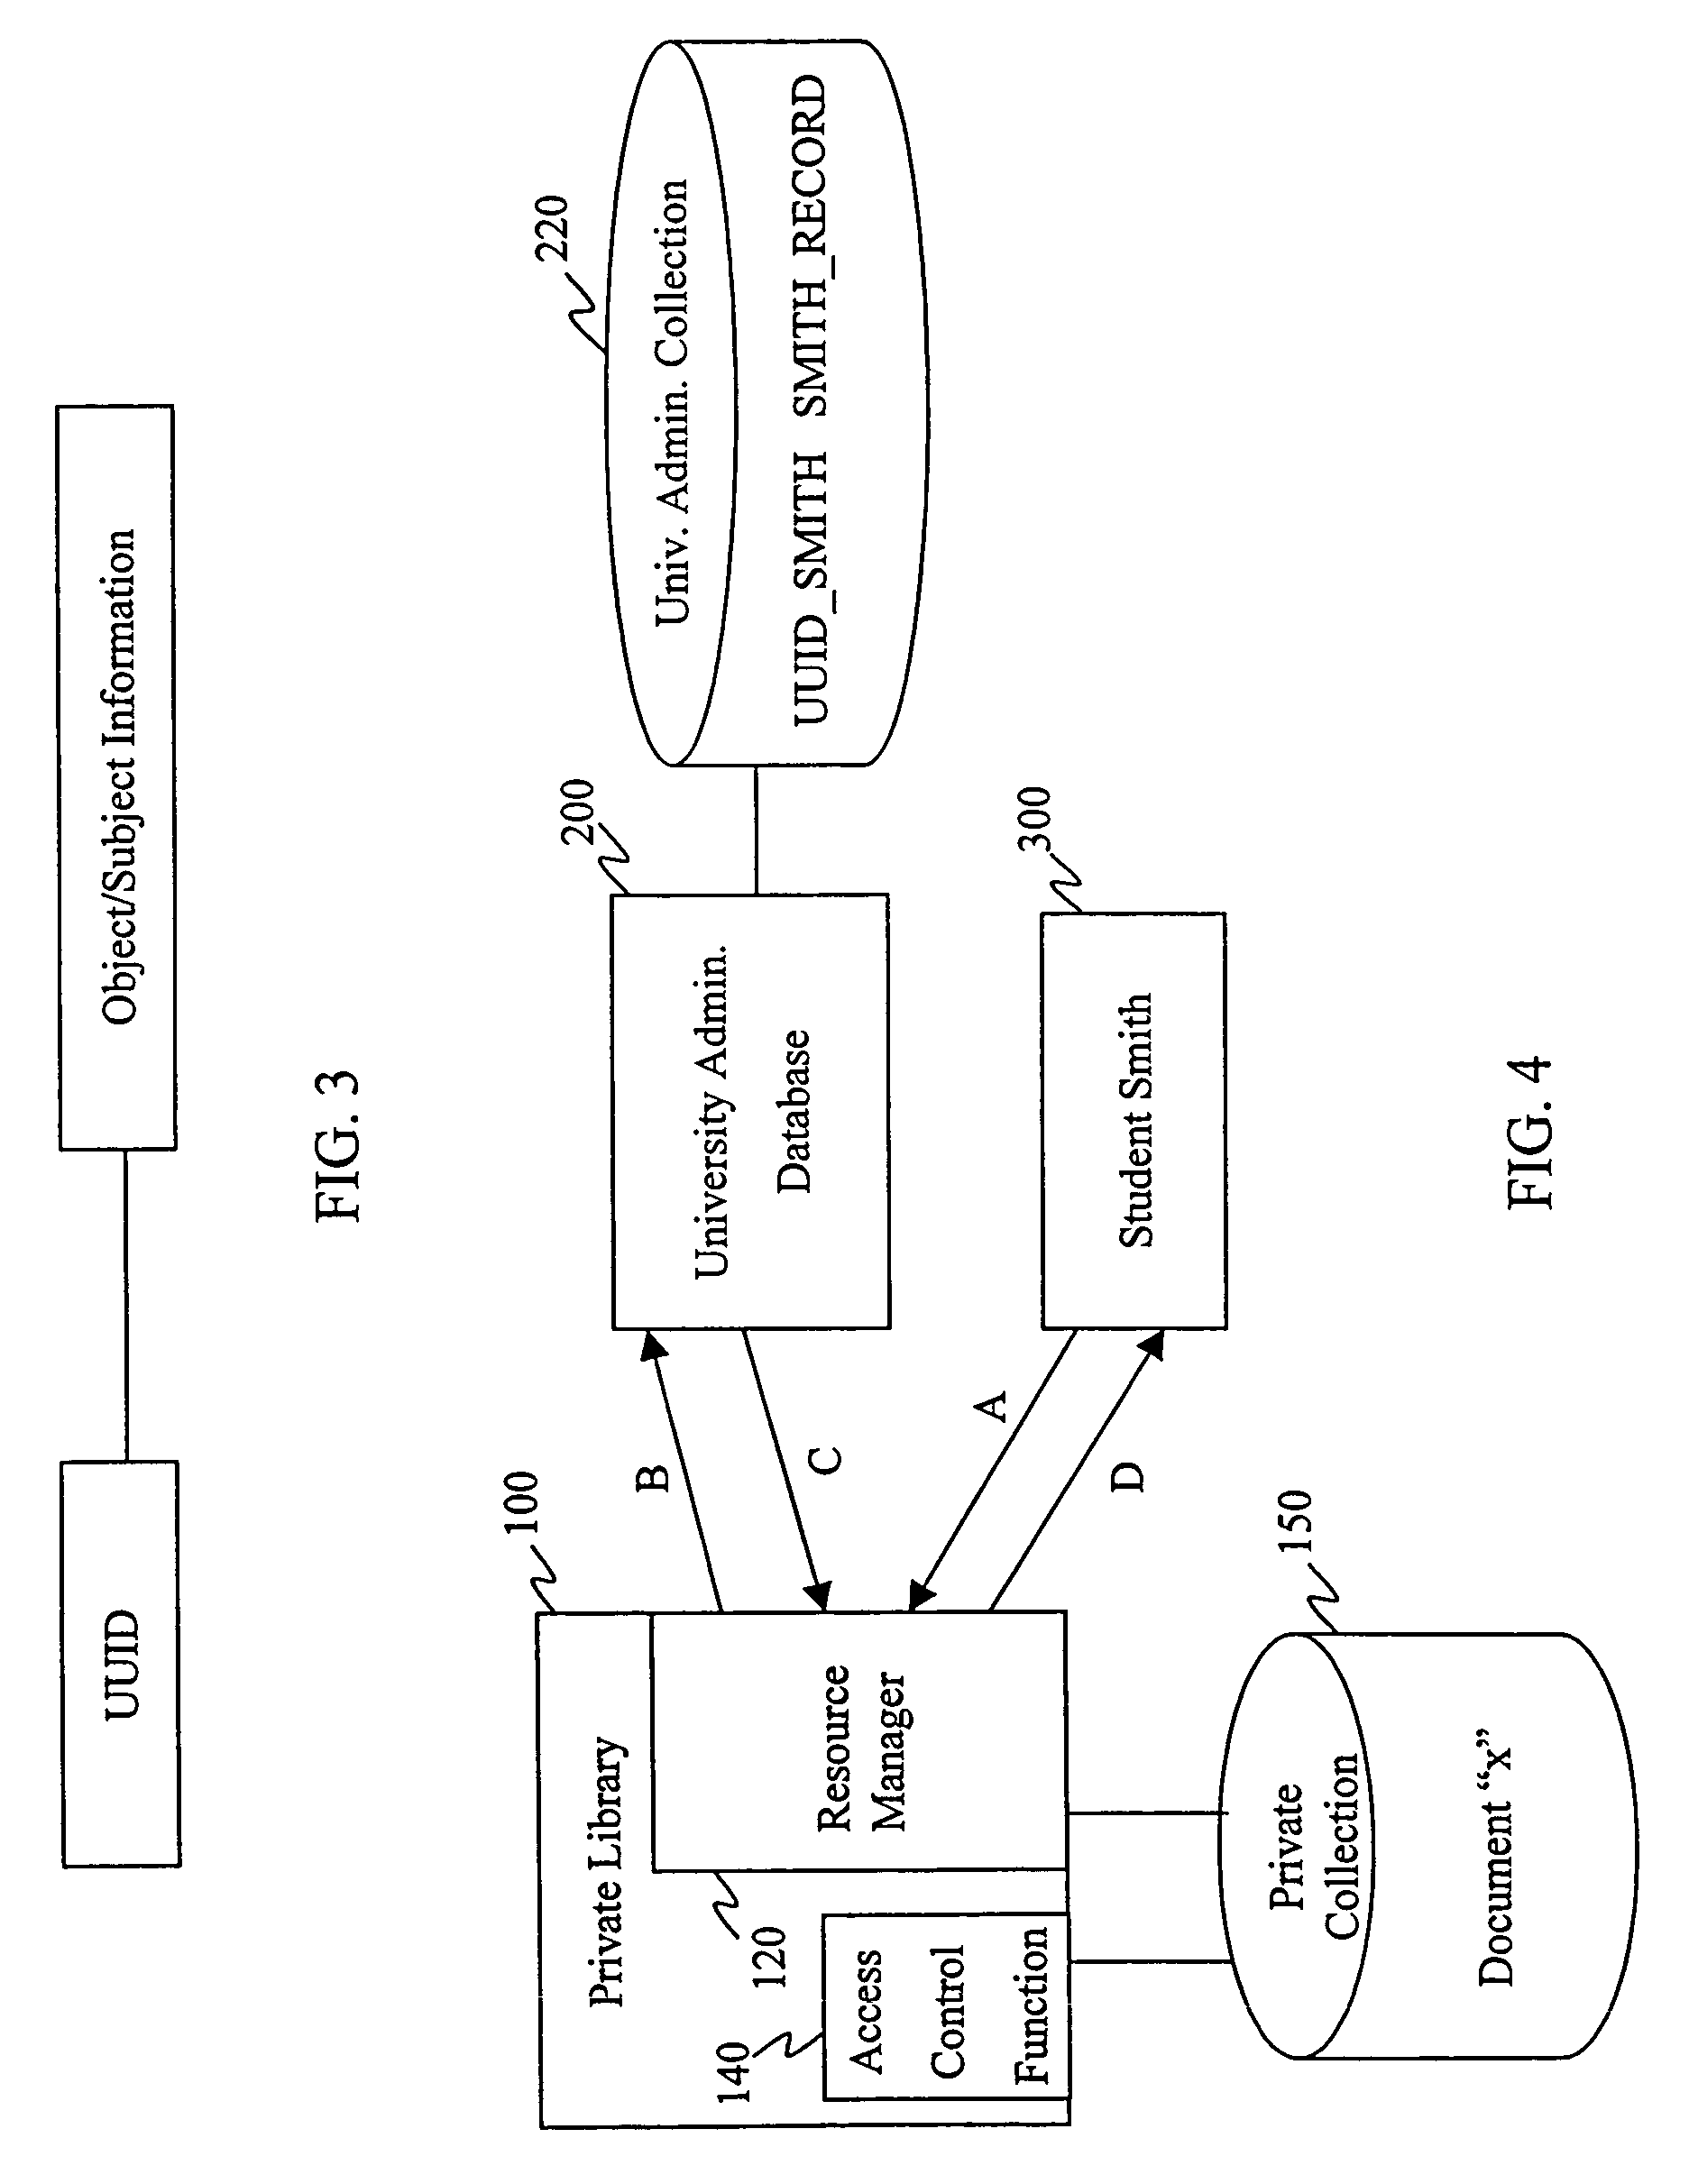 Distributed data structures for authorization and access control for computing resources